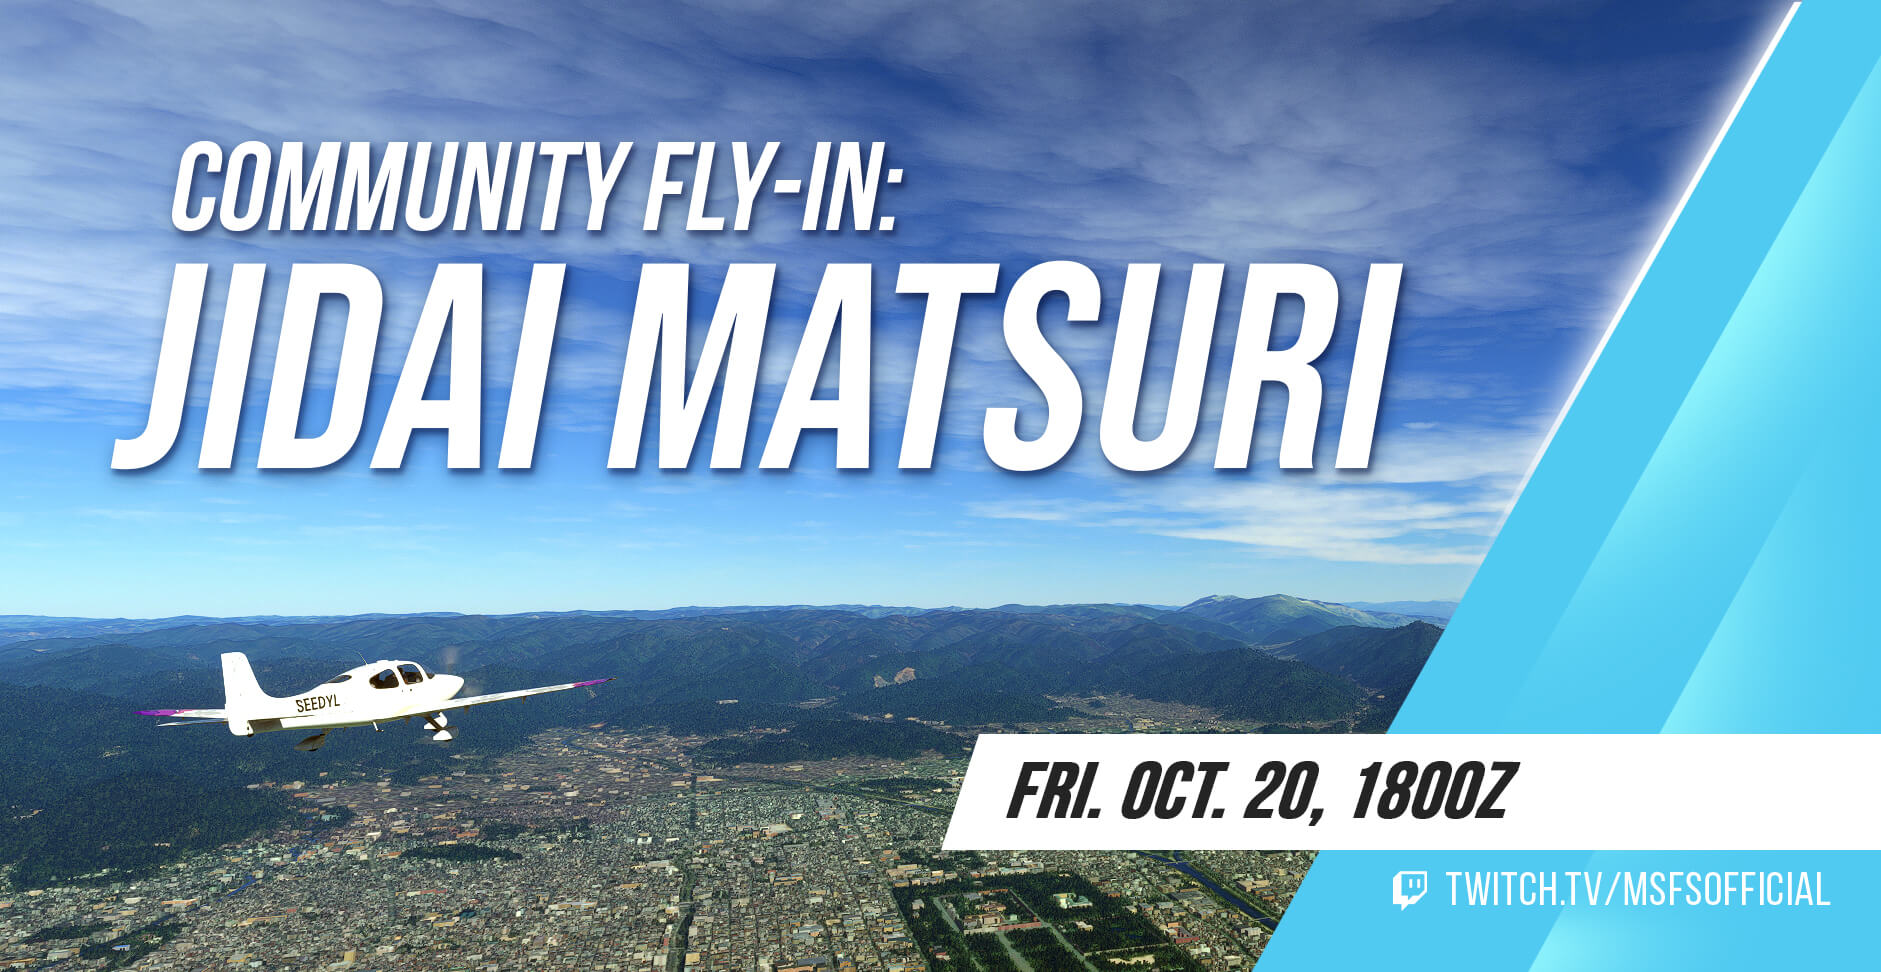 Community Fly-In: Jidai Matsuri. Friday October 20th at 1800z on twitch.tv/msfsofficial